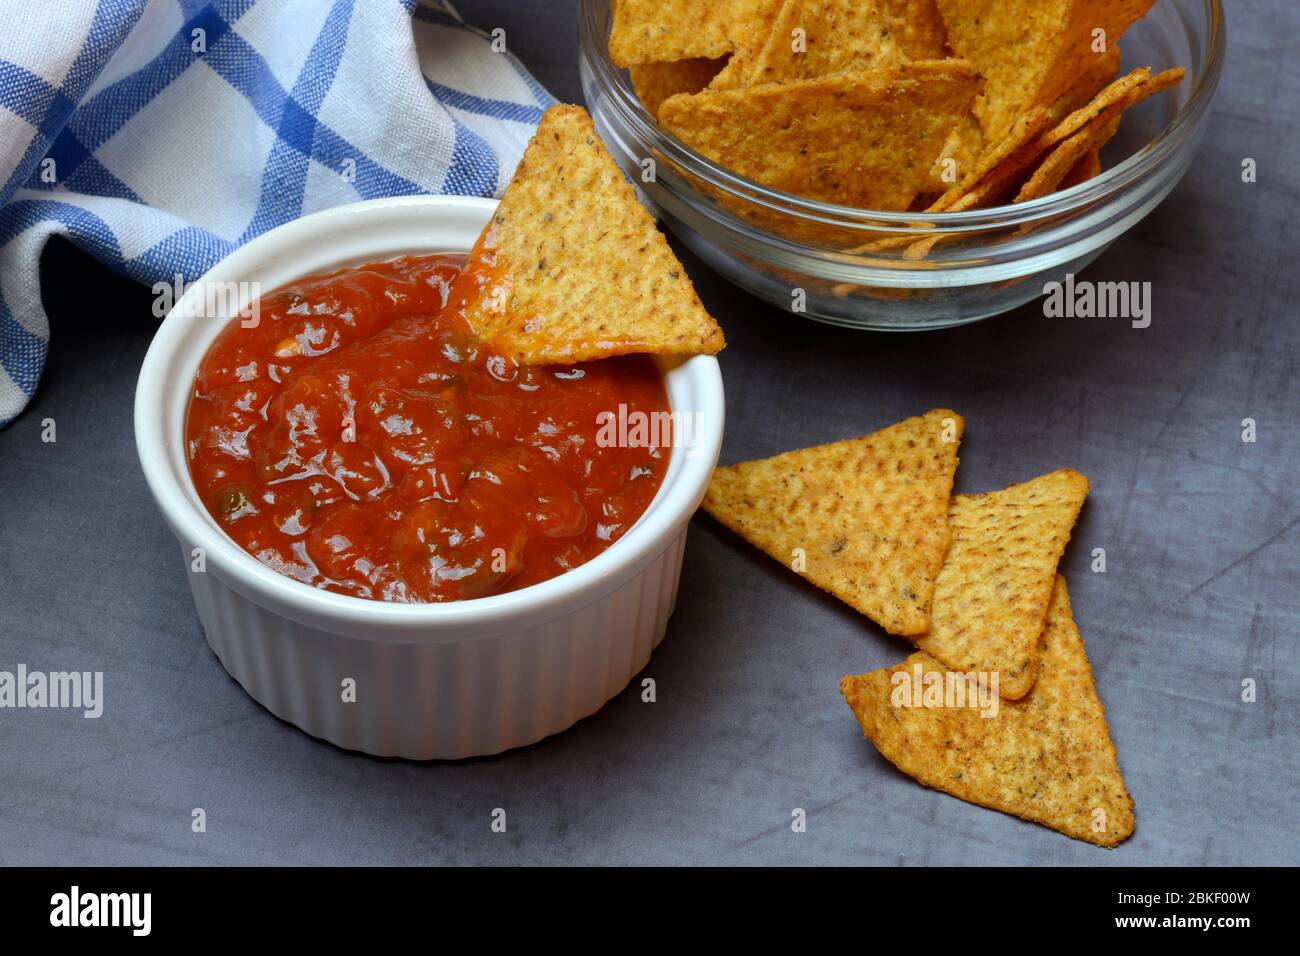 Salsa sauce in shell and tortilla chips, food photography, studio shot, Germany Stock Photo